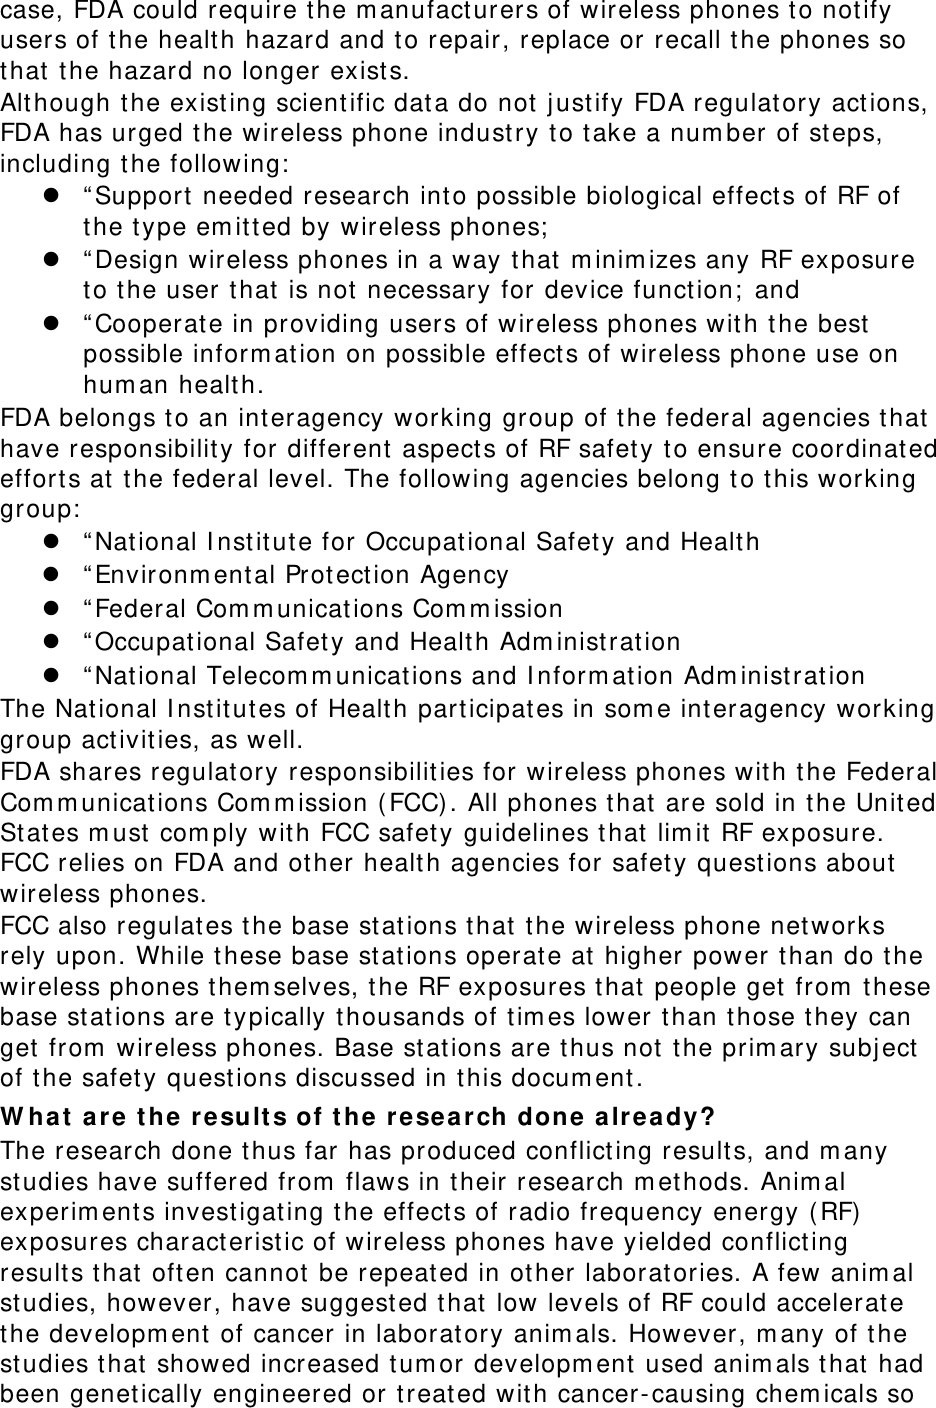 case, FDA could require t he m anufact urers of wireless phones t o notify users of the healt h hazard and to repair, replace or recall t he phones so that t he hazard no longer exist s. Although t he exist ing scient ific dat a do not  j ust ify FDA regulat ory act ions, FDA has urged t he wireless phone indust ry to t ake a num ber of st eps, including t he following:   “ Support  needed research int o possible biological effect s of RF of the type em itt ed by wireless phones;   “ Design wireless phones in a way that m inim izes any RF exposure to the user t hat is not  necessary for device function;  and  “ Cooperat e in providing users of wireless phones wit h t he best  possible inform ation on possible effect s of wireless phone use on hum an healt h. FDA belongs to an interagency working group of the federal agencies t hat  have responsibility for different  aspect s of RF safet y t o ensure coordinat ed effort s at  t he federal level. The following agencies belong t o t his working group:   “ National I nst it ute for Occupat ional Safet y and Health  “ Envir onm ent al Pr ot ection Agency  “ Federal Com m unicat ions Com m ission  “ Occupat ional Safet y and Healt h Adm inist rat ion  “ National Telecom m unications and I nfor m ation Adm inist rat ion The Nat ional I nst itut es of Health par ticipates in som e int er agency working group activit ies, as well. FDA shares regulat ory responsibilit ies for wireless phones with t he Federal Com m unications Com m ission ( FCC). All phones that are sold in t he Unit ed St at es m ust  com ply  wit h FCC safety guidelines t hat lim it RF exposure. FCC relies on FDA and ot her health agencies for safet y quest ions about wireless phones. FCC also regulates t he base stat ions t hat  the wireless phone net works rely upon. While t hese base st ations operate at  higher pow er t han do t he wireless phones t hem selves, the RF exposures t hat people get  from  these base st at ions are t ypically t housands of tim es lower than t hose t hey can get  from  wireless phones. Base stations are thus not t he prim ary subj ect  of t he safet y questions discussed in this docum ent . W ha t  ar e t he re su lt s of t he re sea r ch don e alr ea dy? The research done t hus far has produced conflict ing results, and m any studies have suffered from  flaw s in their research m et hods. Anim al experim ent s invest igat ing t he effect s of radio fr equency energy ( RF)  exposures charact erist ic of wireless phones have yielded conflict ing results t hat often cannot  be repeat ed in ot her  laboratories. A few anim al studies, however, have suggest ed t hat  low levels of RF could accelerate the developm ent  of cancer in laborat ory anim als. However, m any of t he studies t hat showed increased t um or developm ent  used anim als t hat had been genetically engineered or treated wit h cancer-causing chem icals so 